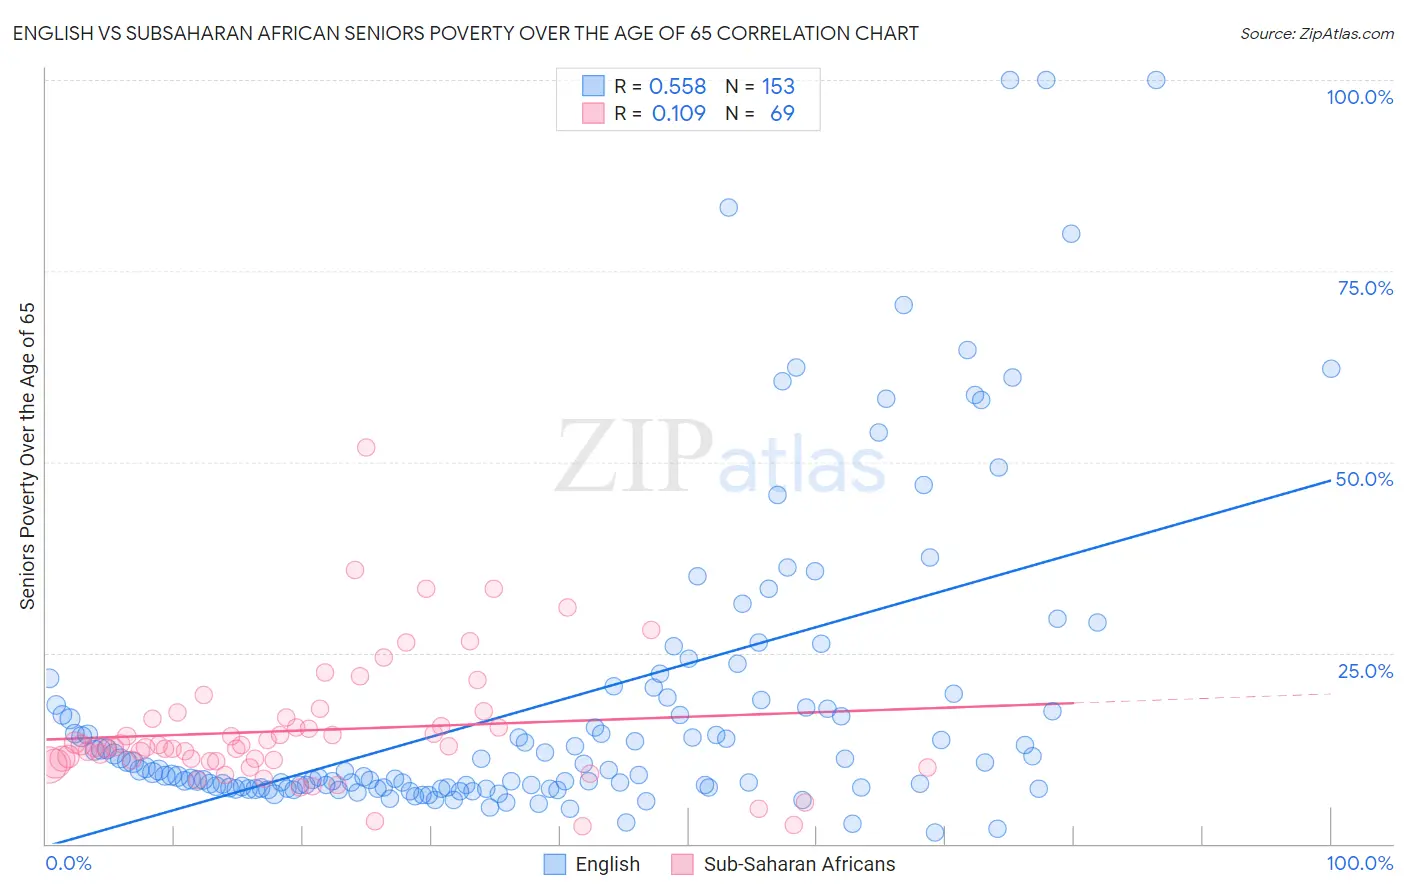 English vs Subsaharan African Seniors Poverty Over the Age of 65